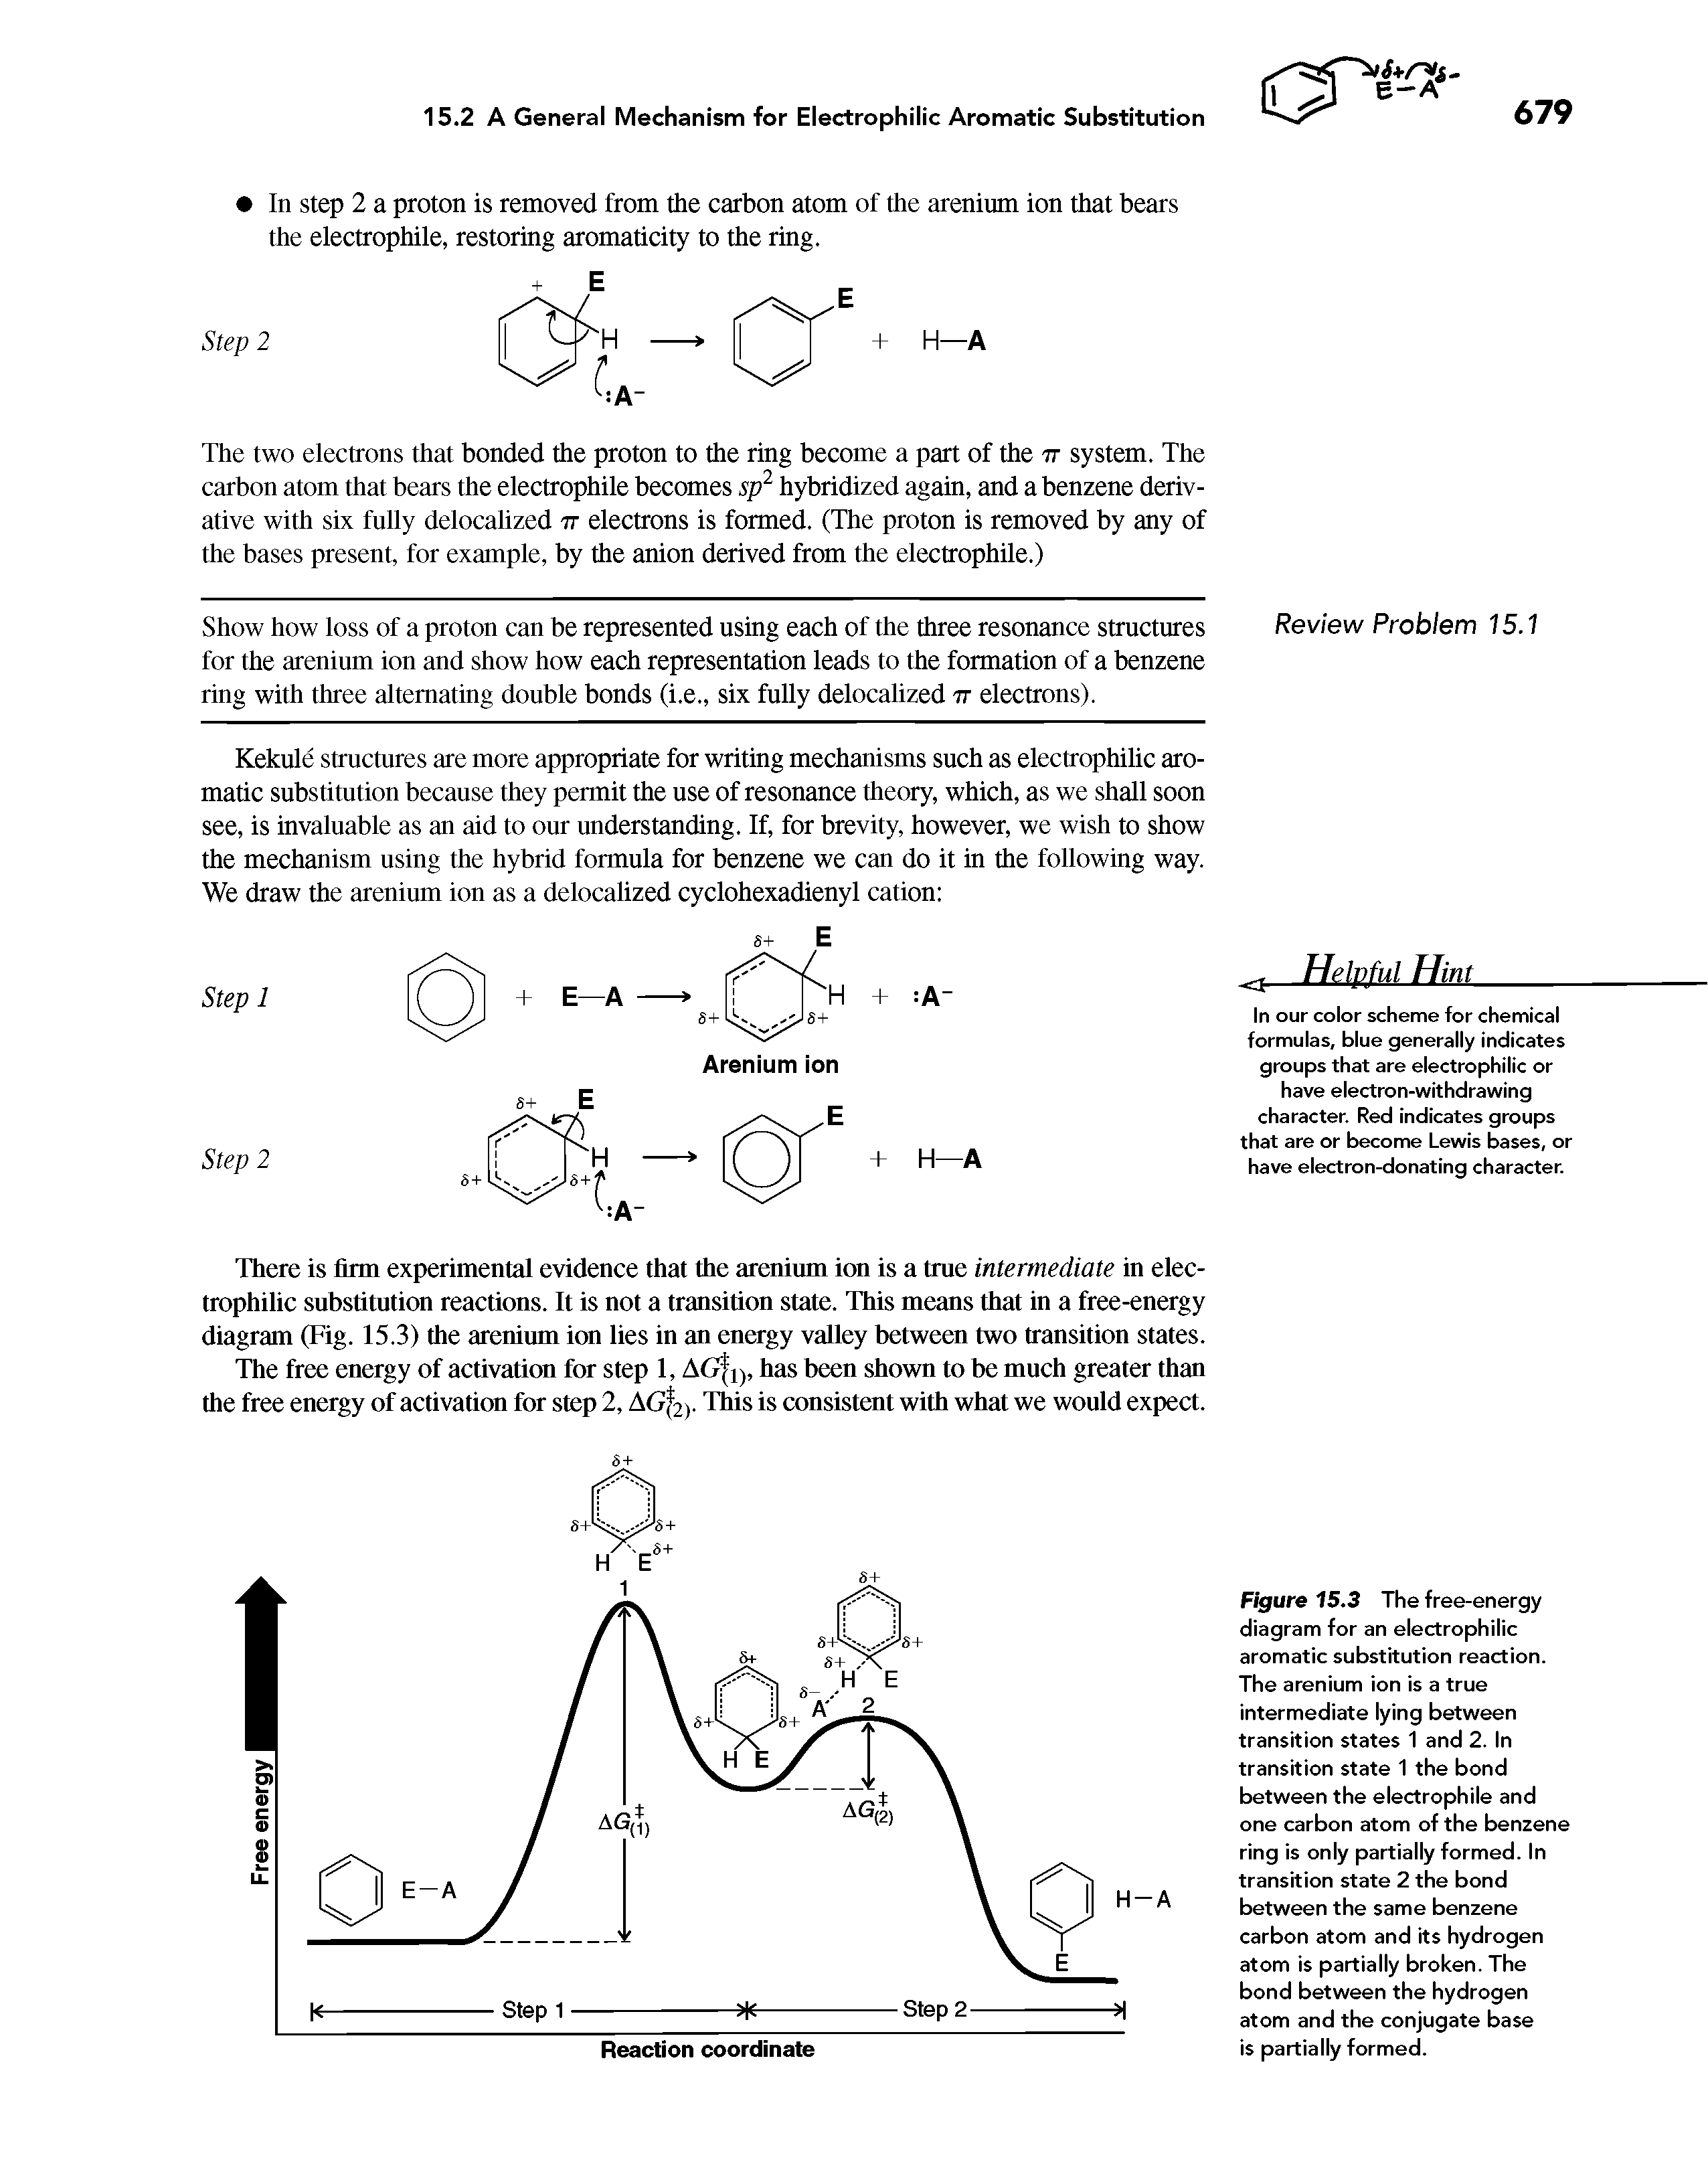 Figure 15.3 The free-energy diagram for an electrophilic aromatic substitution reaction. The arenium ion is a true intermediate lying between transition states 1 and 2. In transition state 1 the bond between the electrophile and one carbon atom of the benzene ring is only partially formed. In transition state 2 the bond between the same benzene carbon atom and its hydrogen atom is partially broken. The bond between the hydrogen atom and the conjugate base is partially formed.